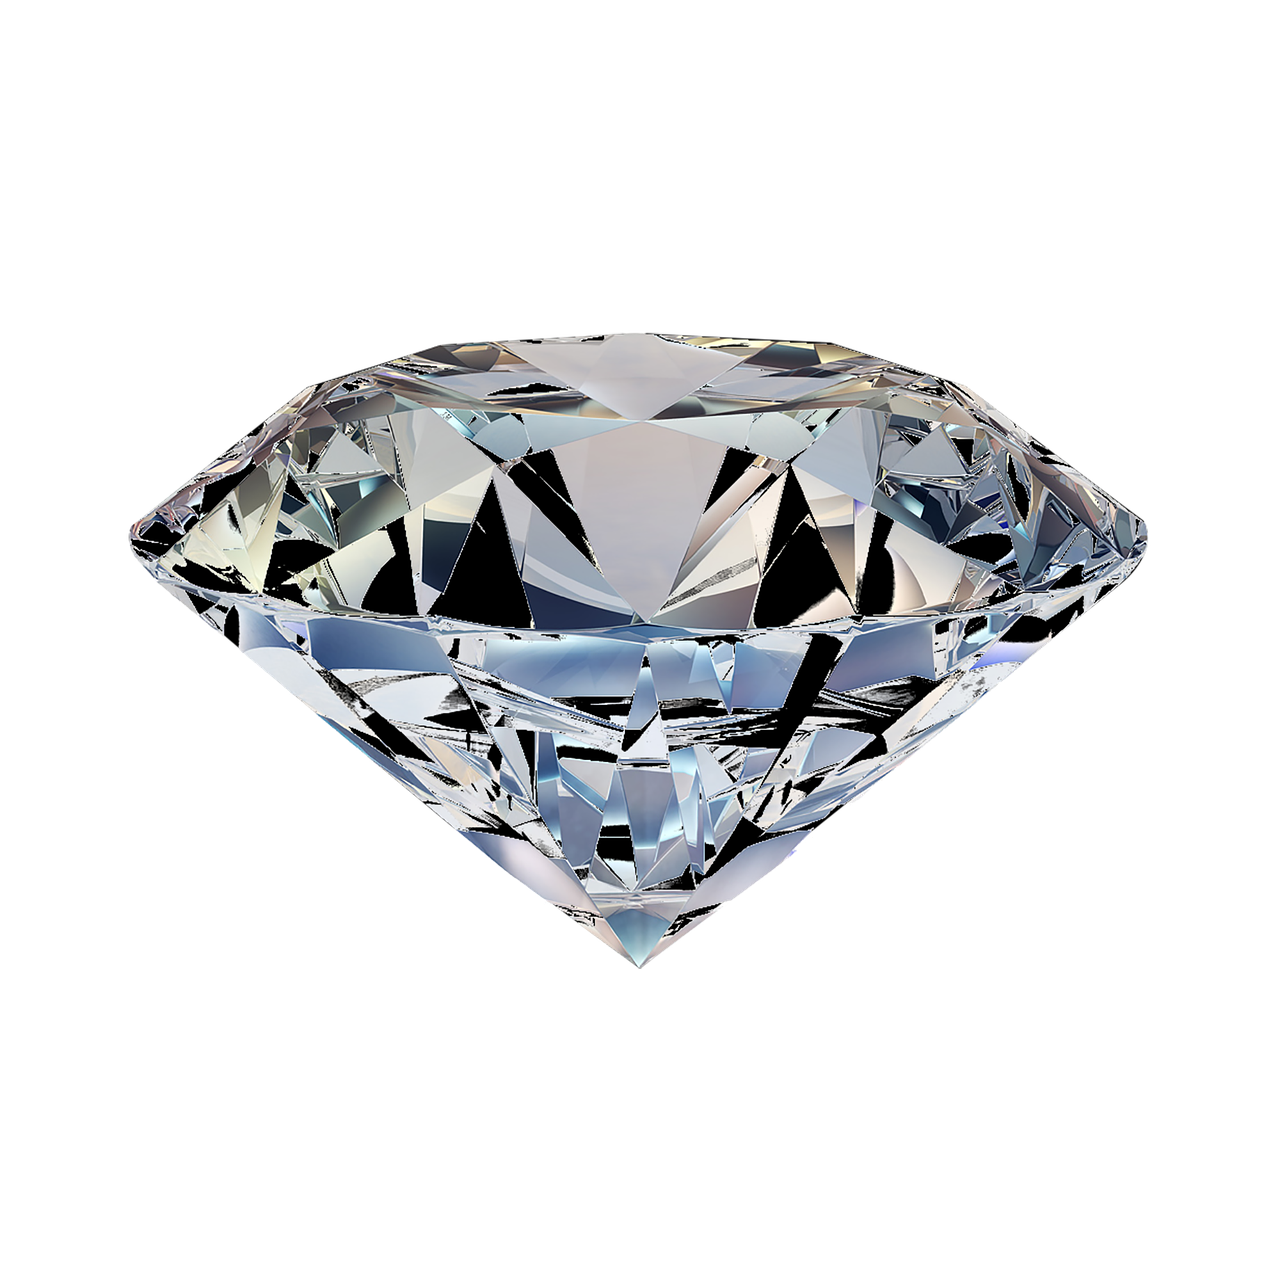 Download Free Photo Of Isolated Transparent Background Transparent Transparent Diamond Isolated Diamond From Needpix Com